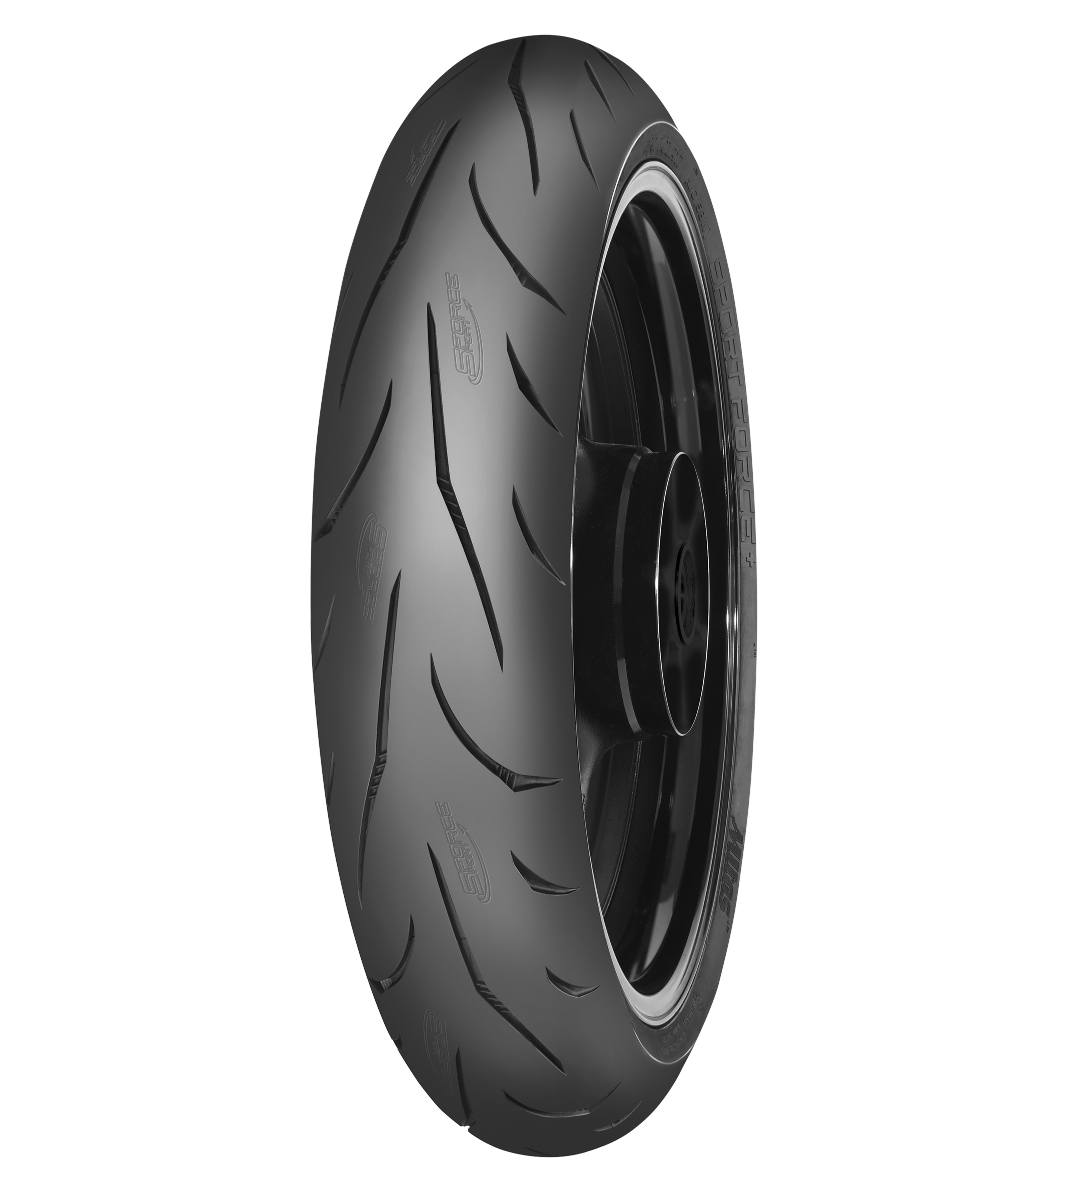 Mitas SPORT FORCE+ 120/60ZR17 Motorcycle Sport On-Road (55W) No Stripe Tubeless Front Tire, 566457, 120/60ZR17, Front, Motorcycle Sport, On-Road, Sport, Sport Force+, Sport Touring, Tires - Imported and distributed in North & South America by Lindeco Genuine Powersports - Premier Powersports Equipment and Accessories for Motorcycle Enthusiasts, Professional Riders and Dealers.